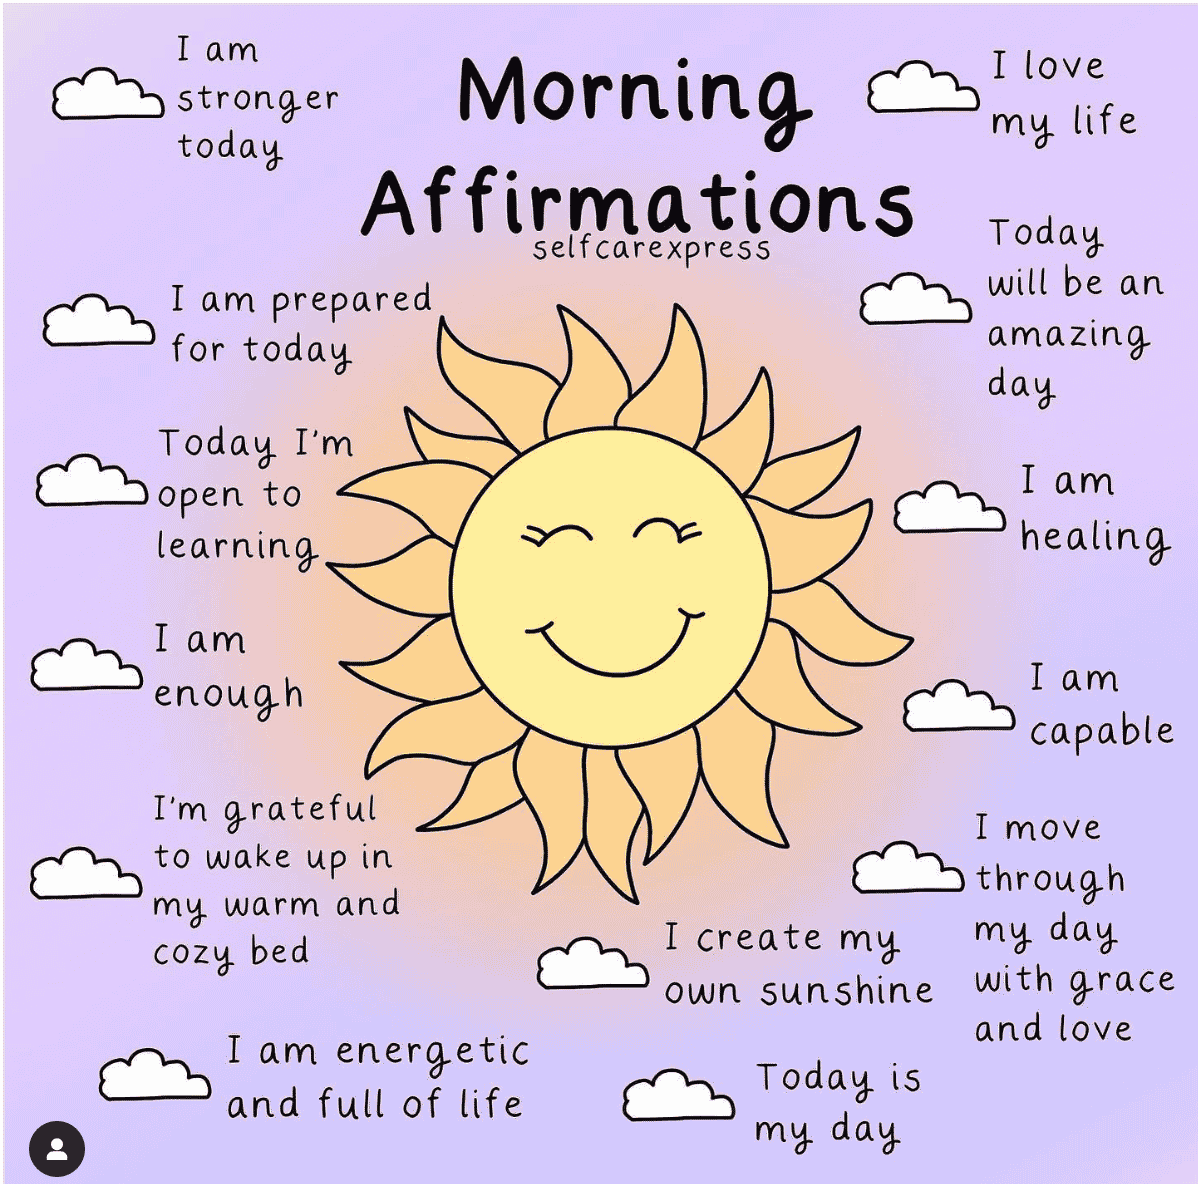 morning affirmation graphic with sunshine